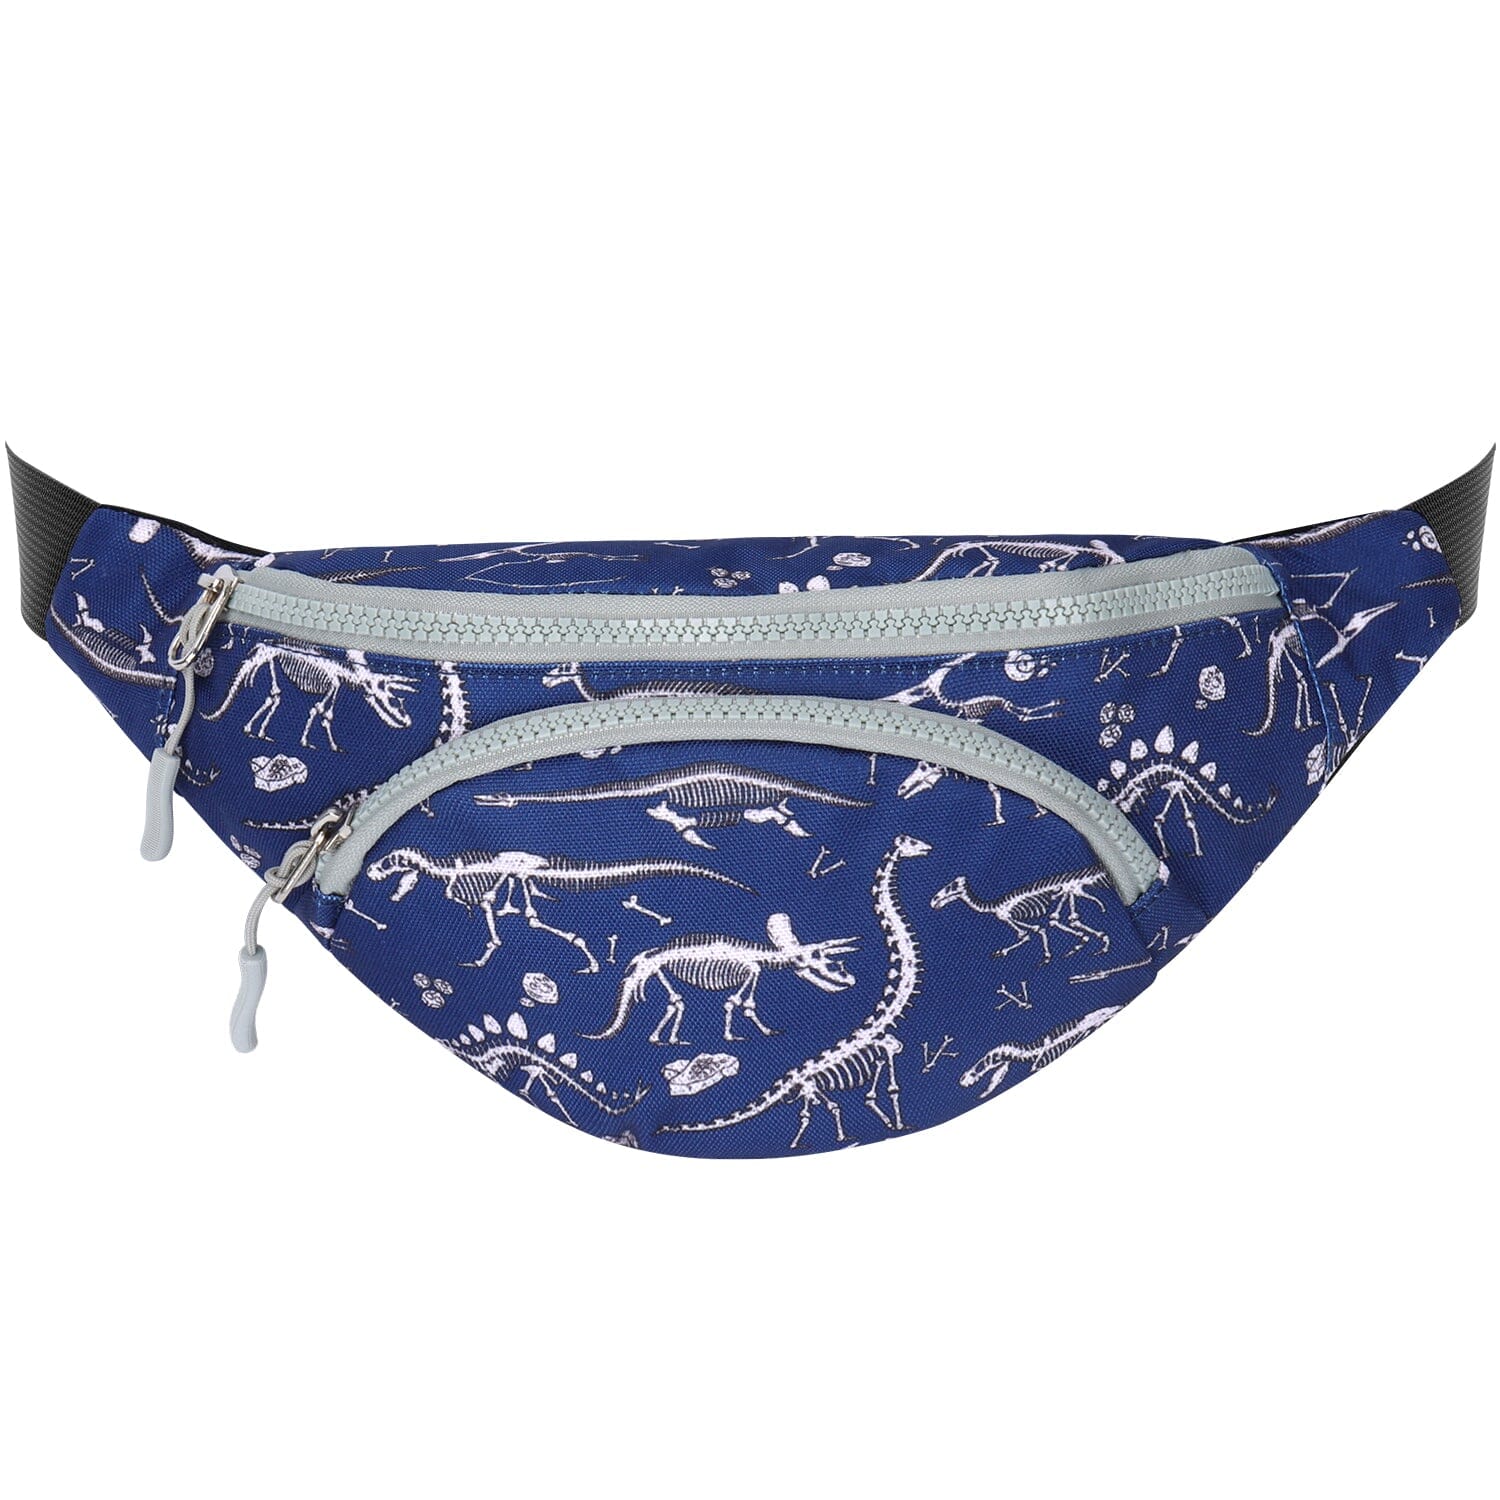 Choco Mocha Dinosaur Fossil Kids Fanny Pack for Toddler Boys, Children Size Blue Waist Pack 11.8*5.5 inches fanny pack chocomochakids 